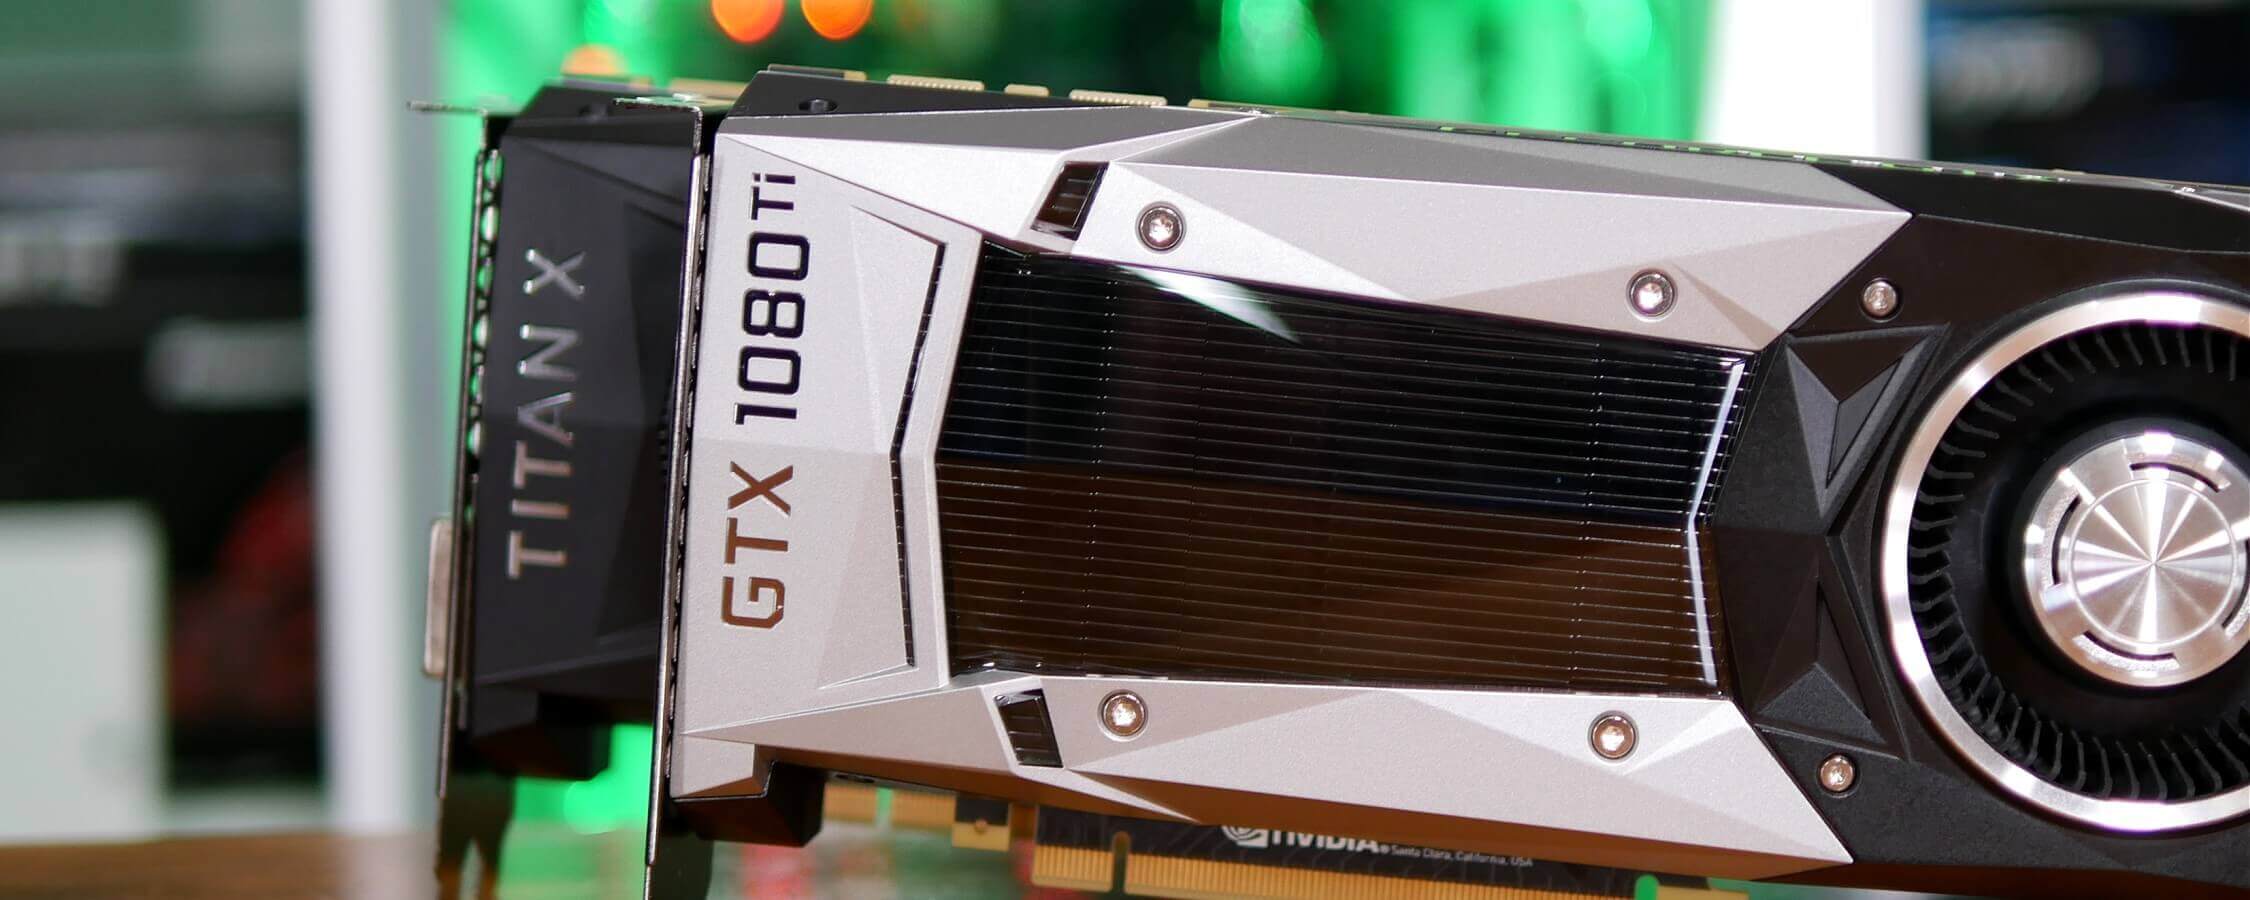 The GTX 1080 Ti could be next in line for a comeback